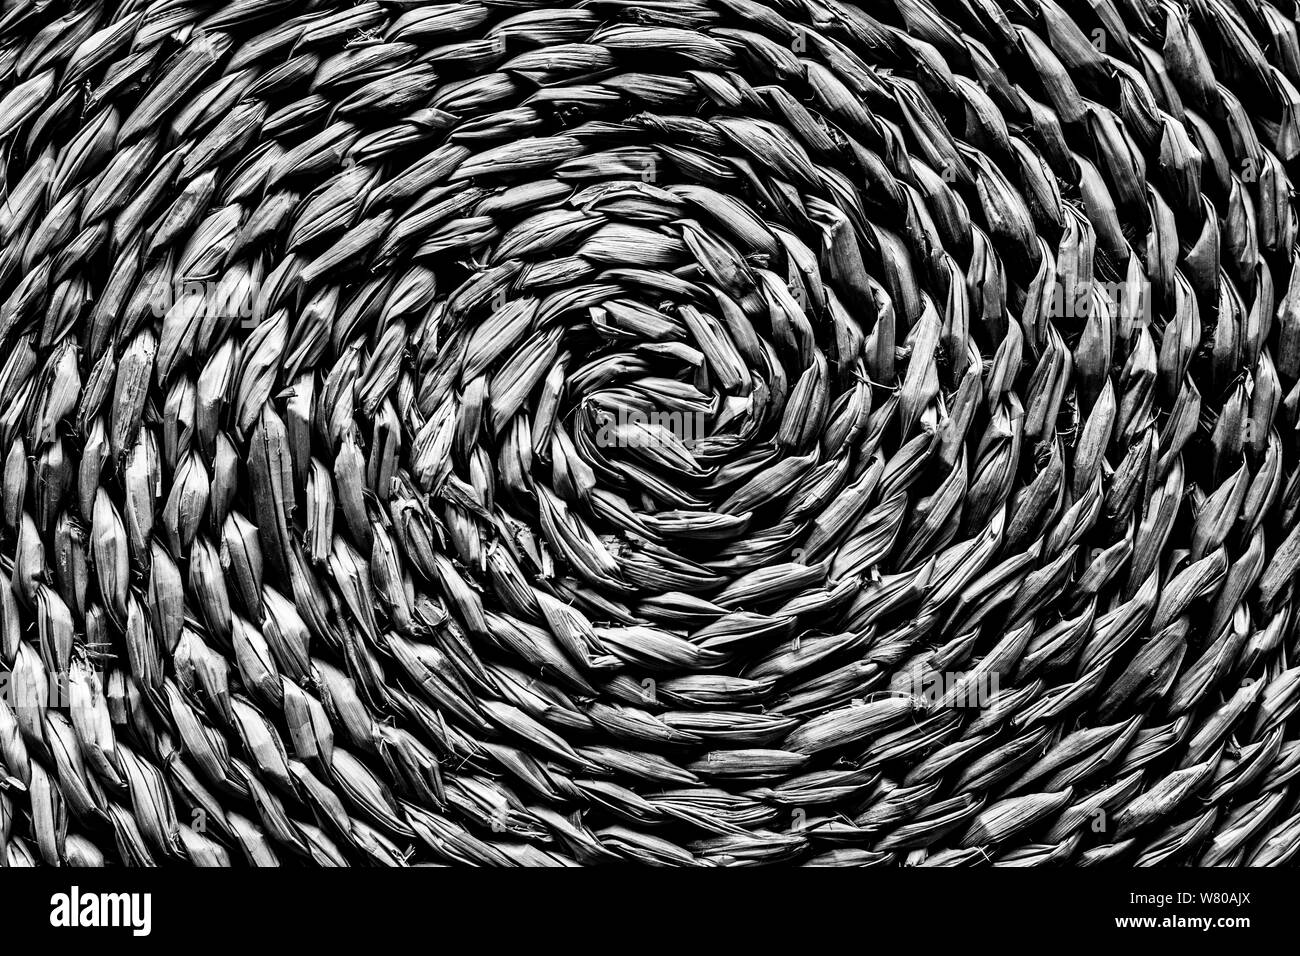 Natural straw table mat round braided, central spiral - monochrome image Stock Photo